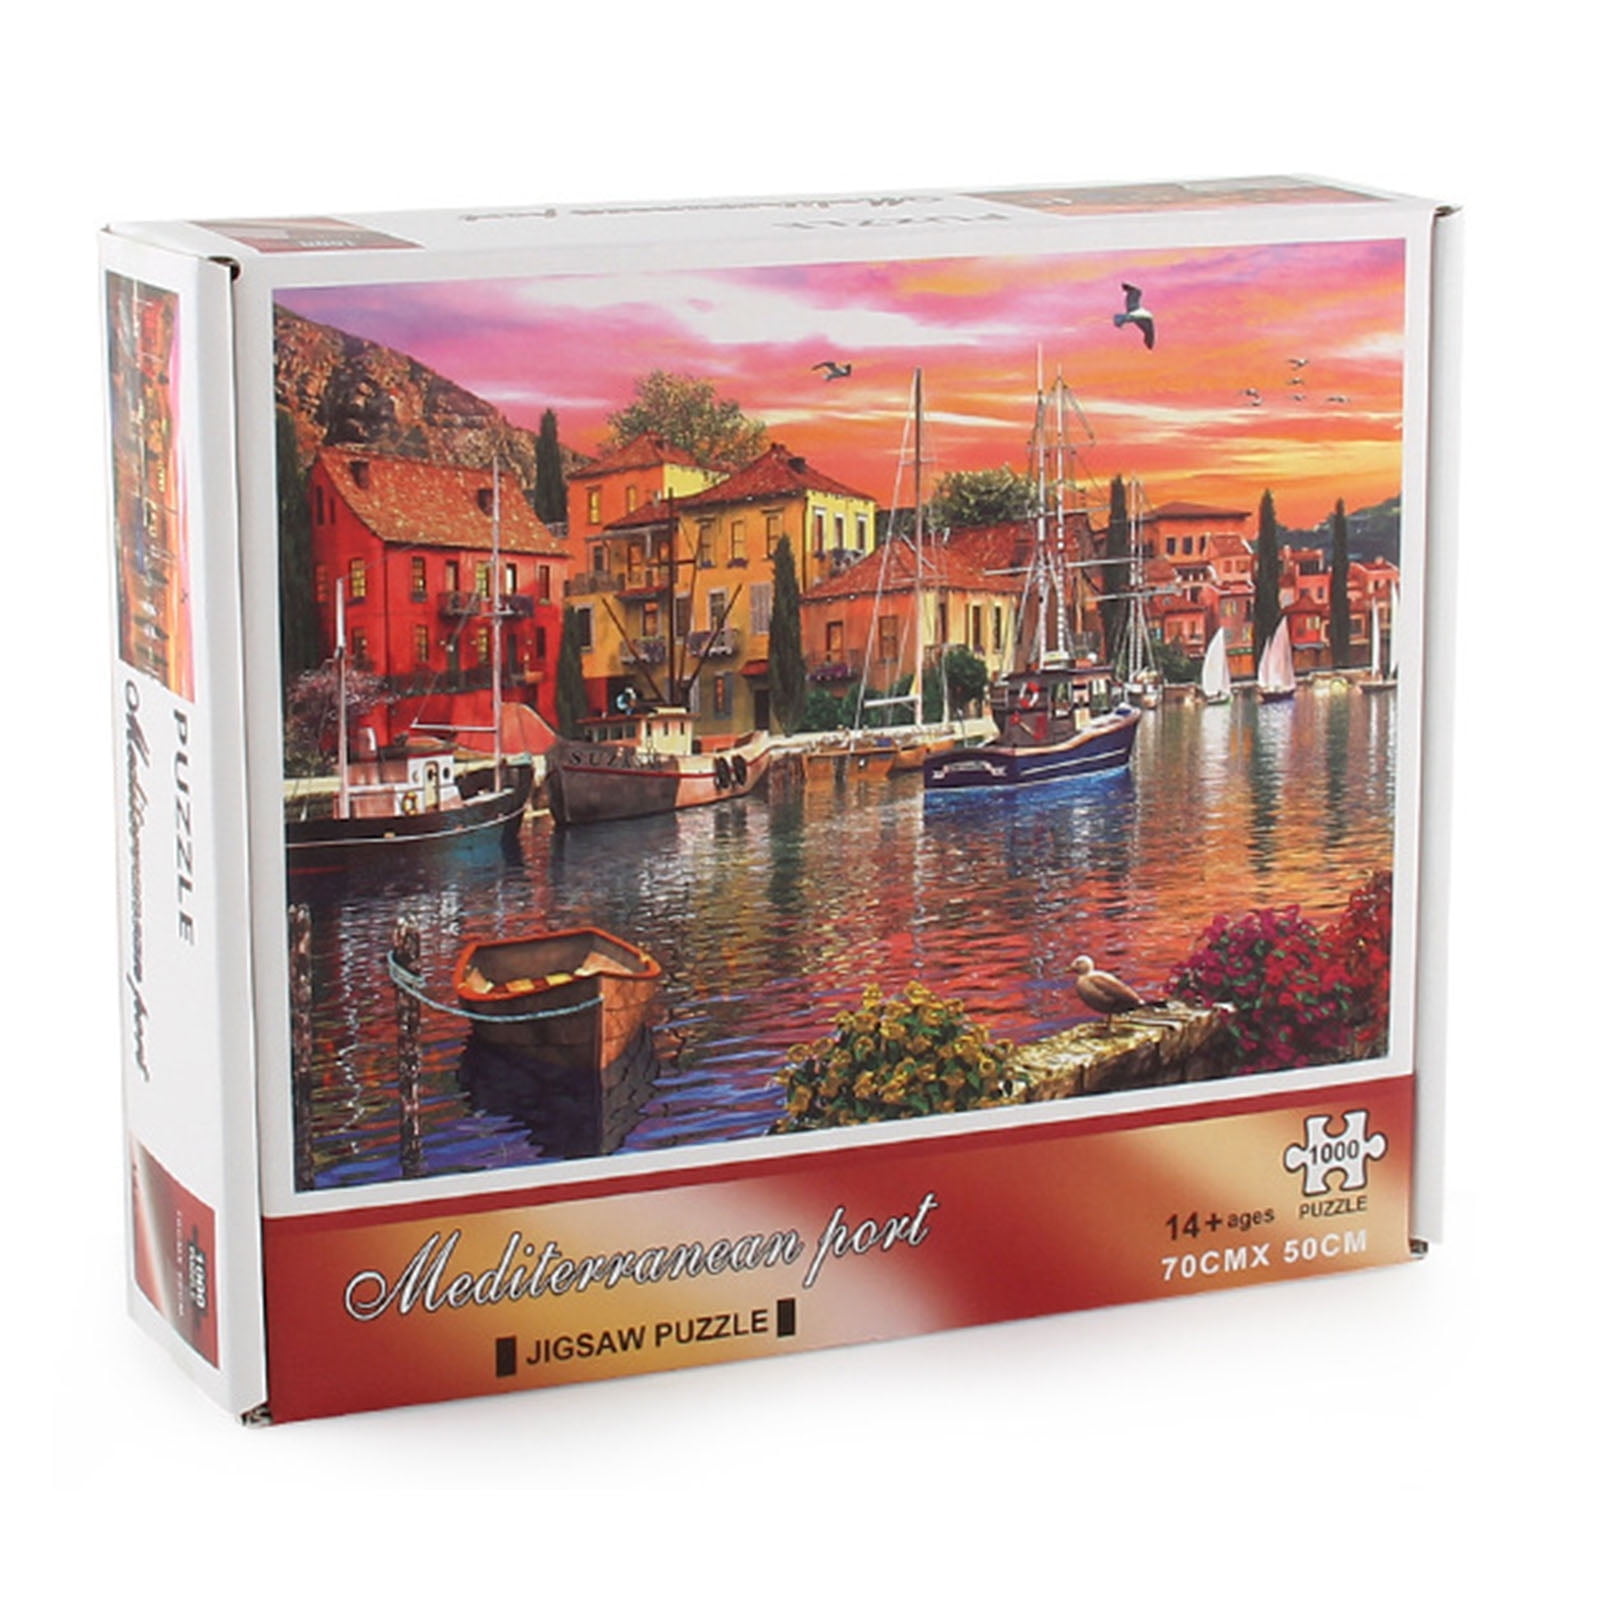 Adult Jigsaw Puzzles-Venice Landscape Picture-3000 Pieces Jigsaw Puzzle Game for Preschool Children Learning Educational Family